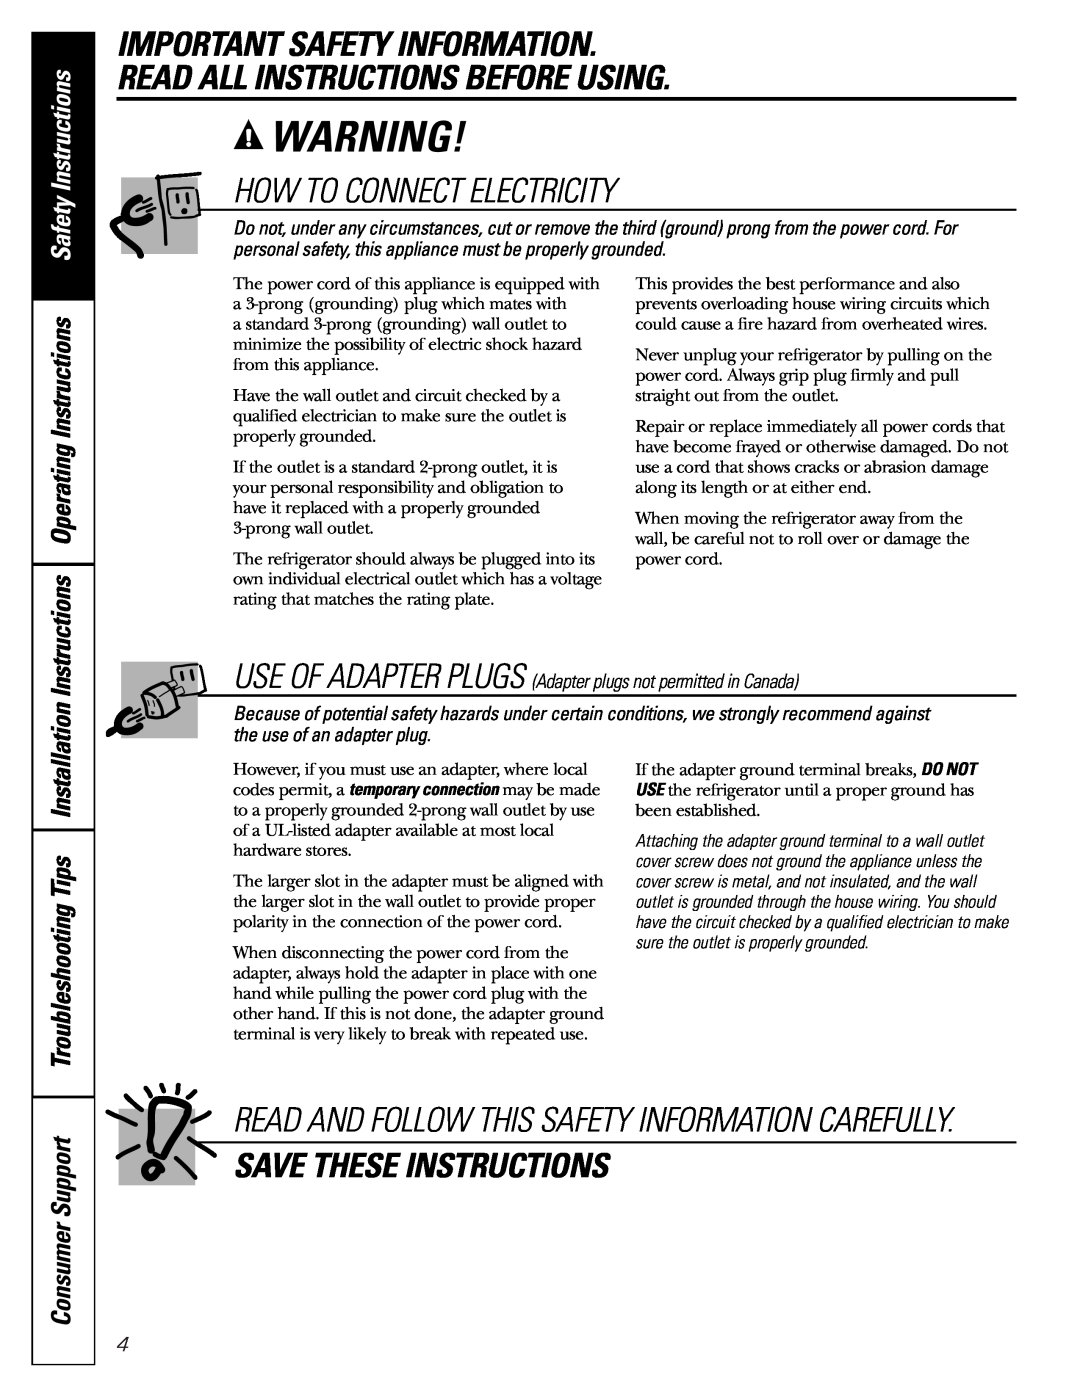 GE 25 How To Connect Electricity, Save These Instructions, Troubleshooting Tips, Consumer Support, Safety Instructions 